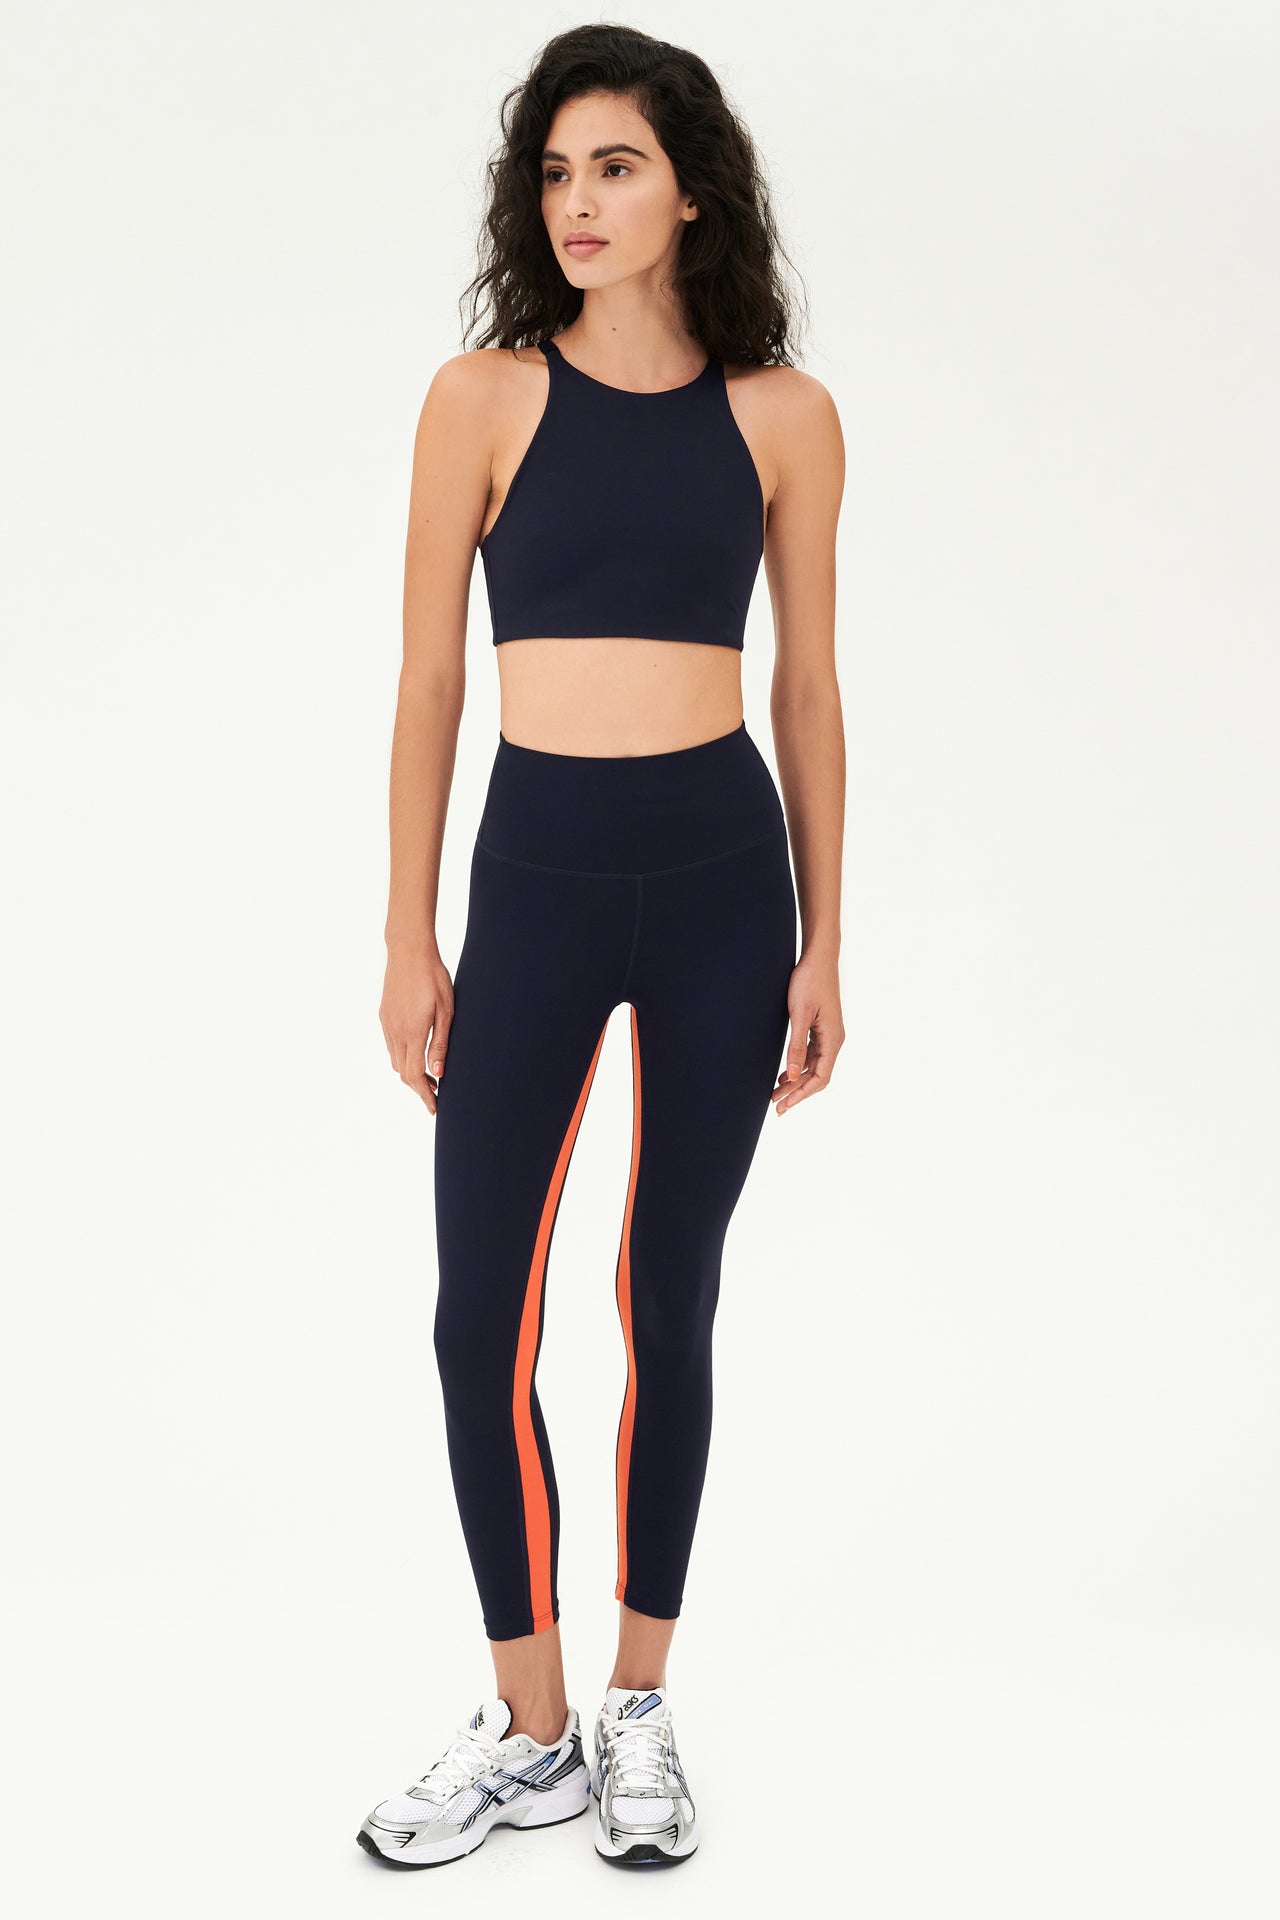 Full front view of girl wearing dark blue sports bra that stops at collarbone and dark blue leggings with white shoes